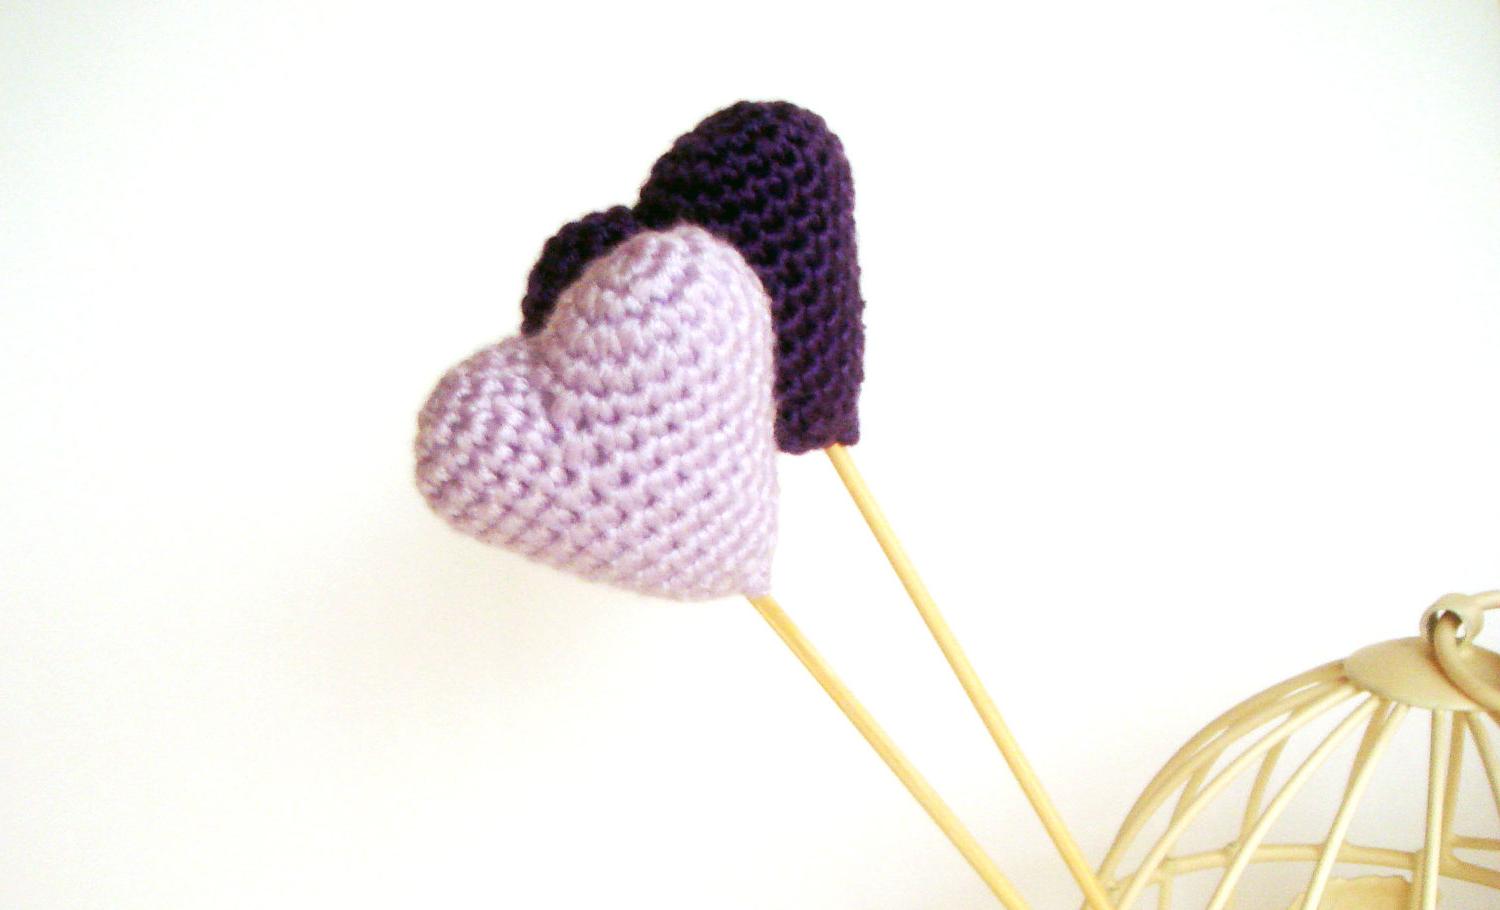 Crocheted hearts lavender and purple  set of 2  wedding favor or ornament